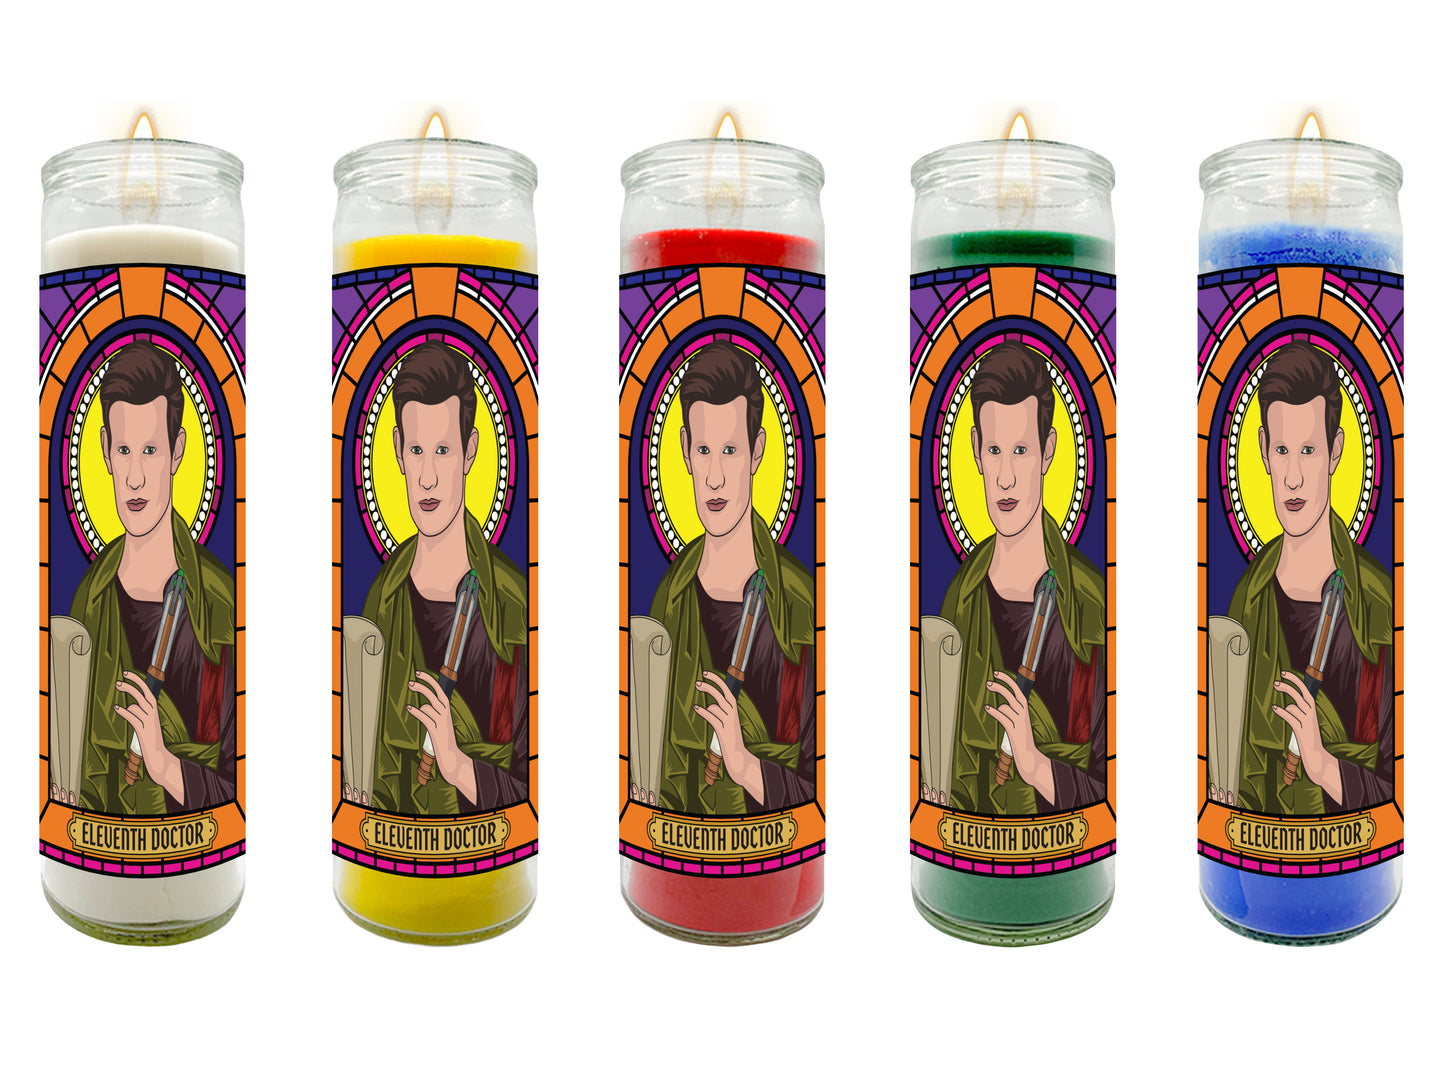 The Doctor Illustrated Prayer Candle Set